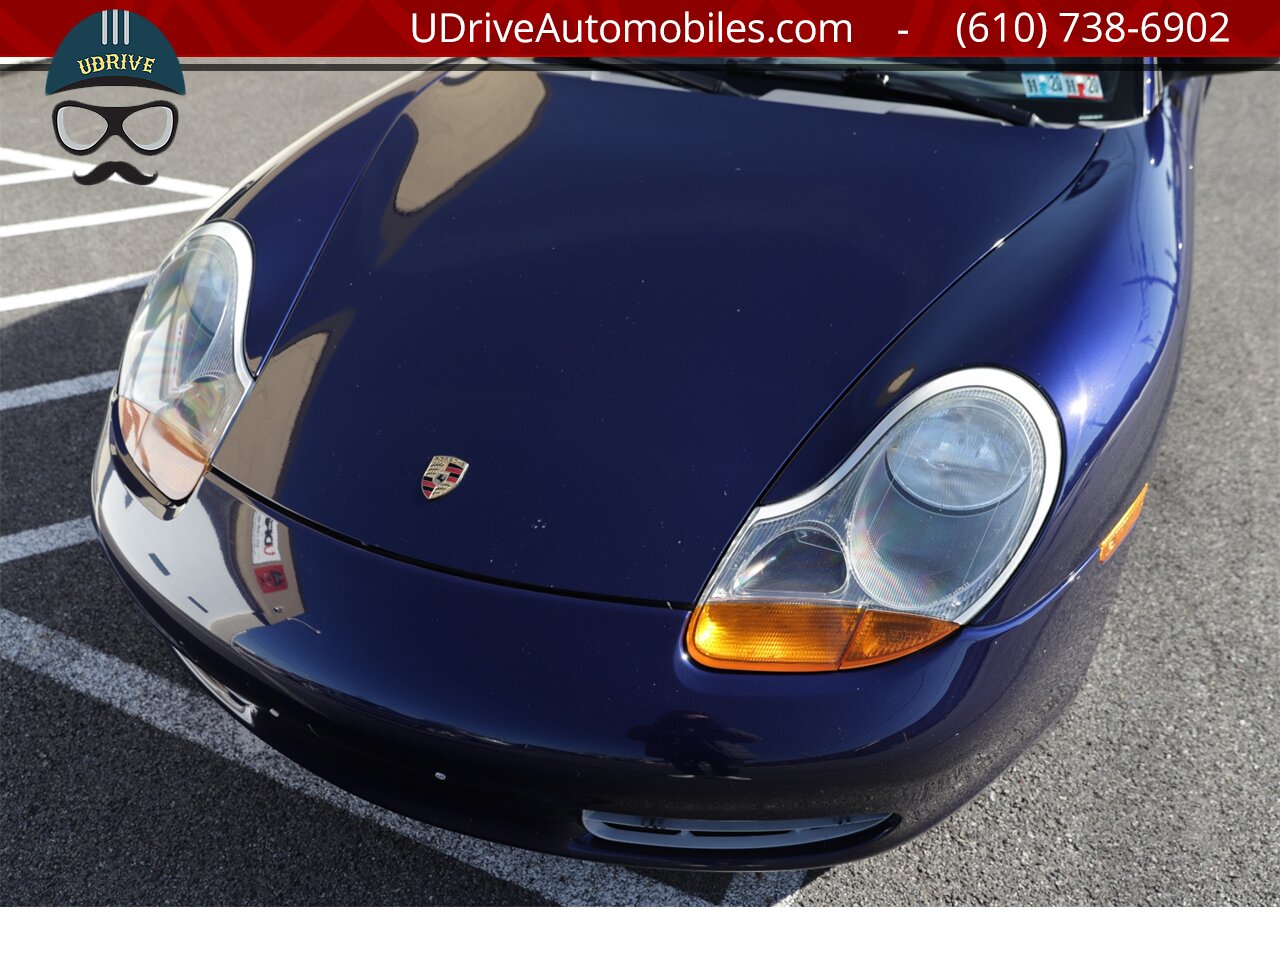 2001 Porsche Boxster 5 Speed Manual Detailed Service History  Same Owner for Last 18 Years Hard Top Included - Photo 10 - West Chester, PA 19382